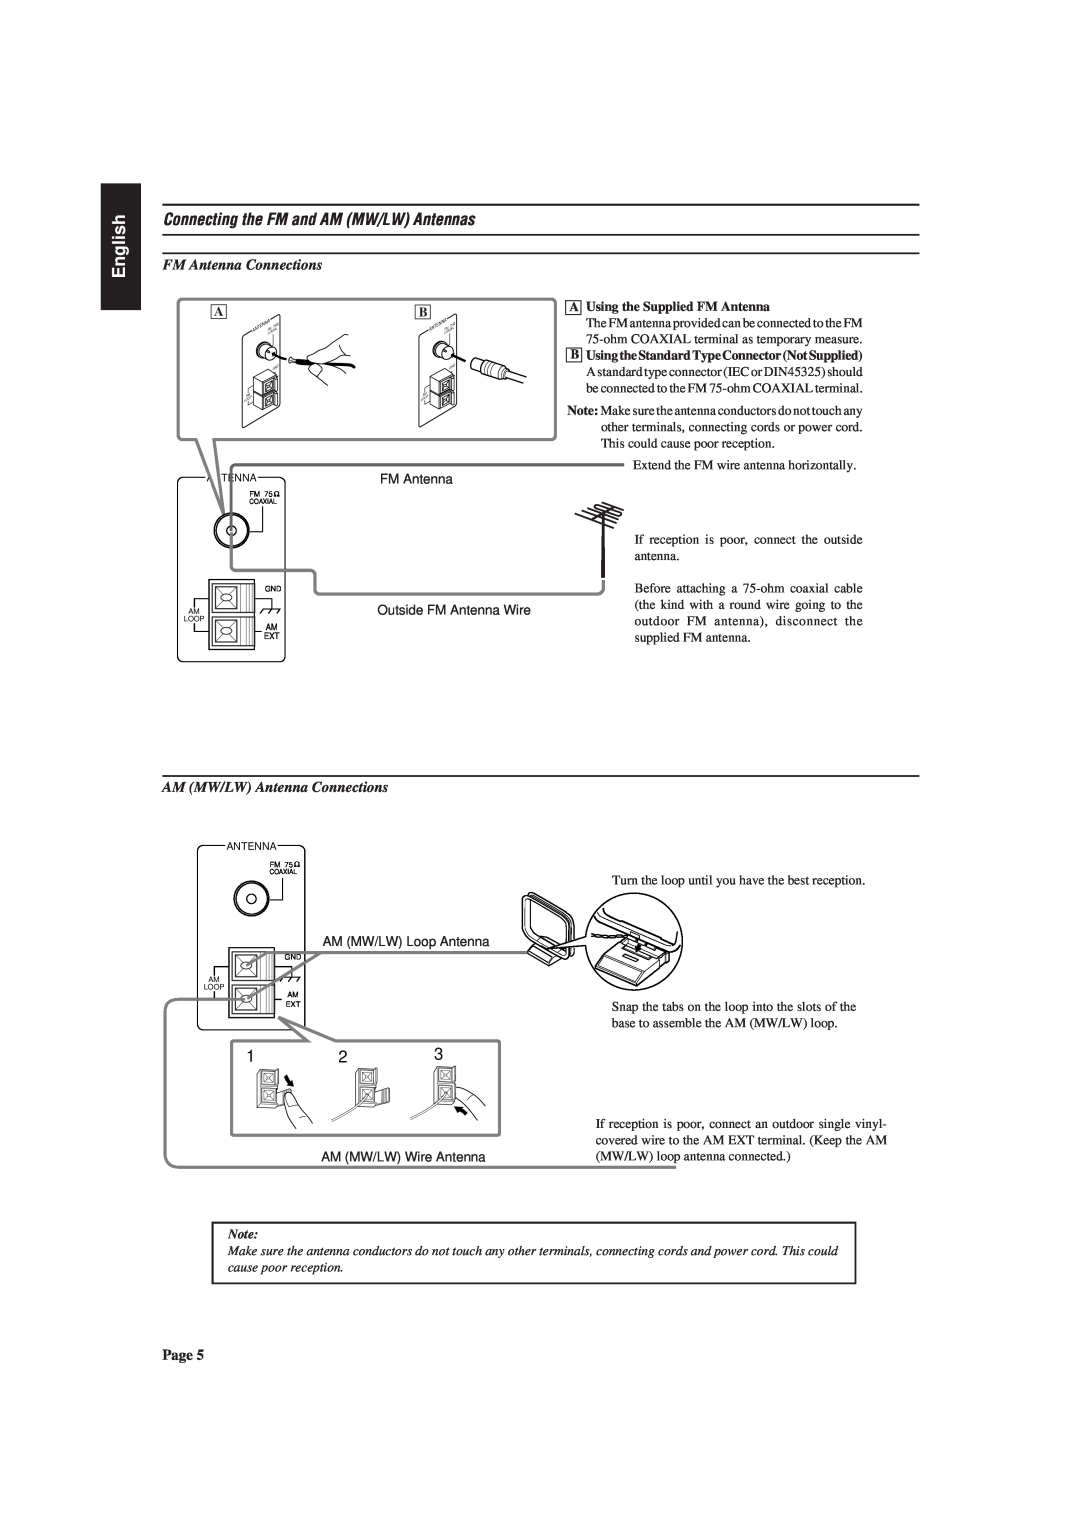 JVC RX-730RBK manual Connecting the FM and AM MW/LW Antennas, FM Antenna Connections, AM MW/LW Antenna Connections, English 